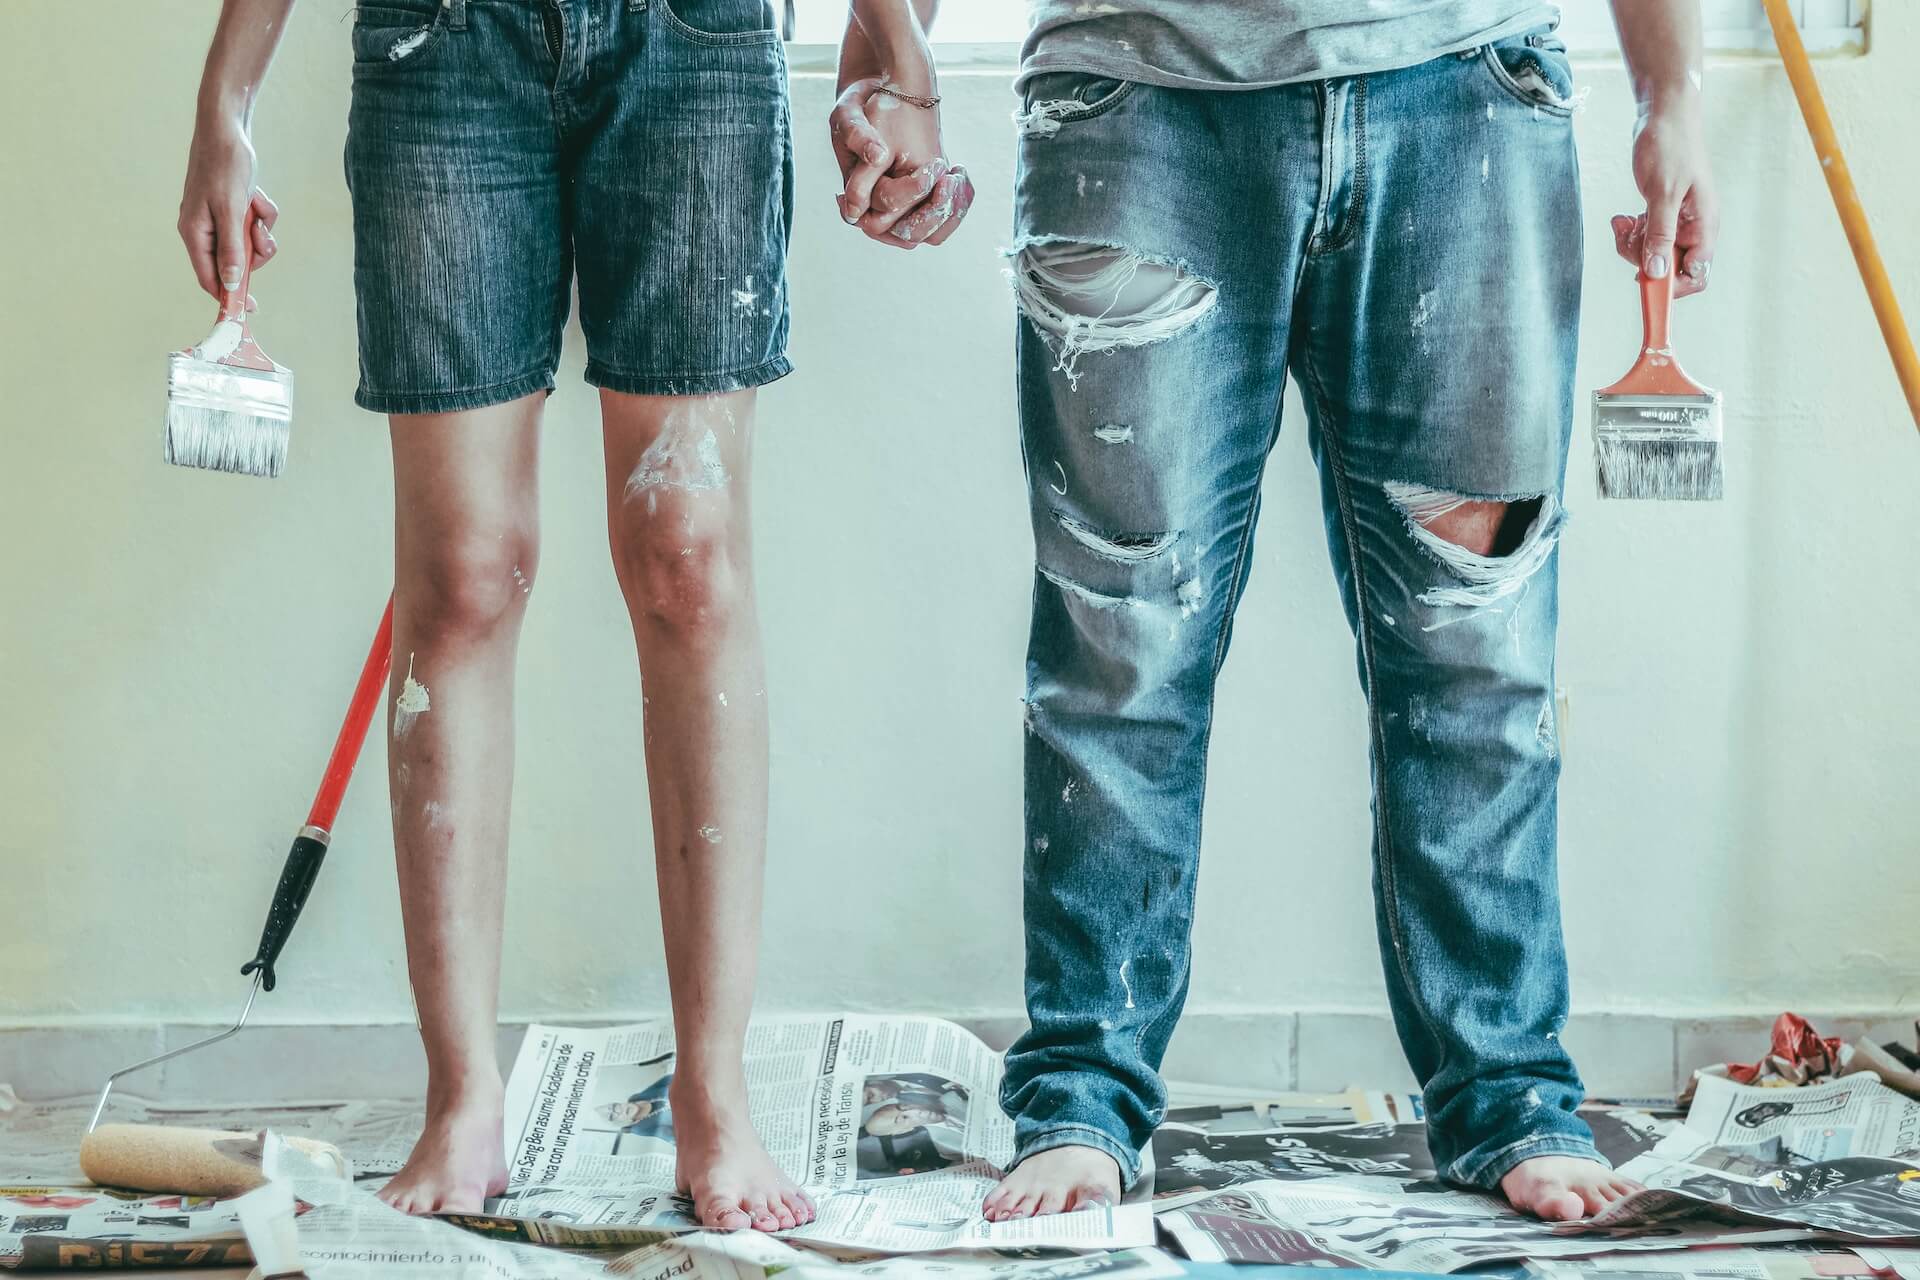 top 10 mistakes to avoid in DIY painting projects